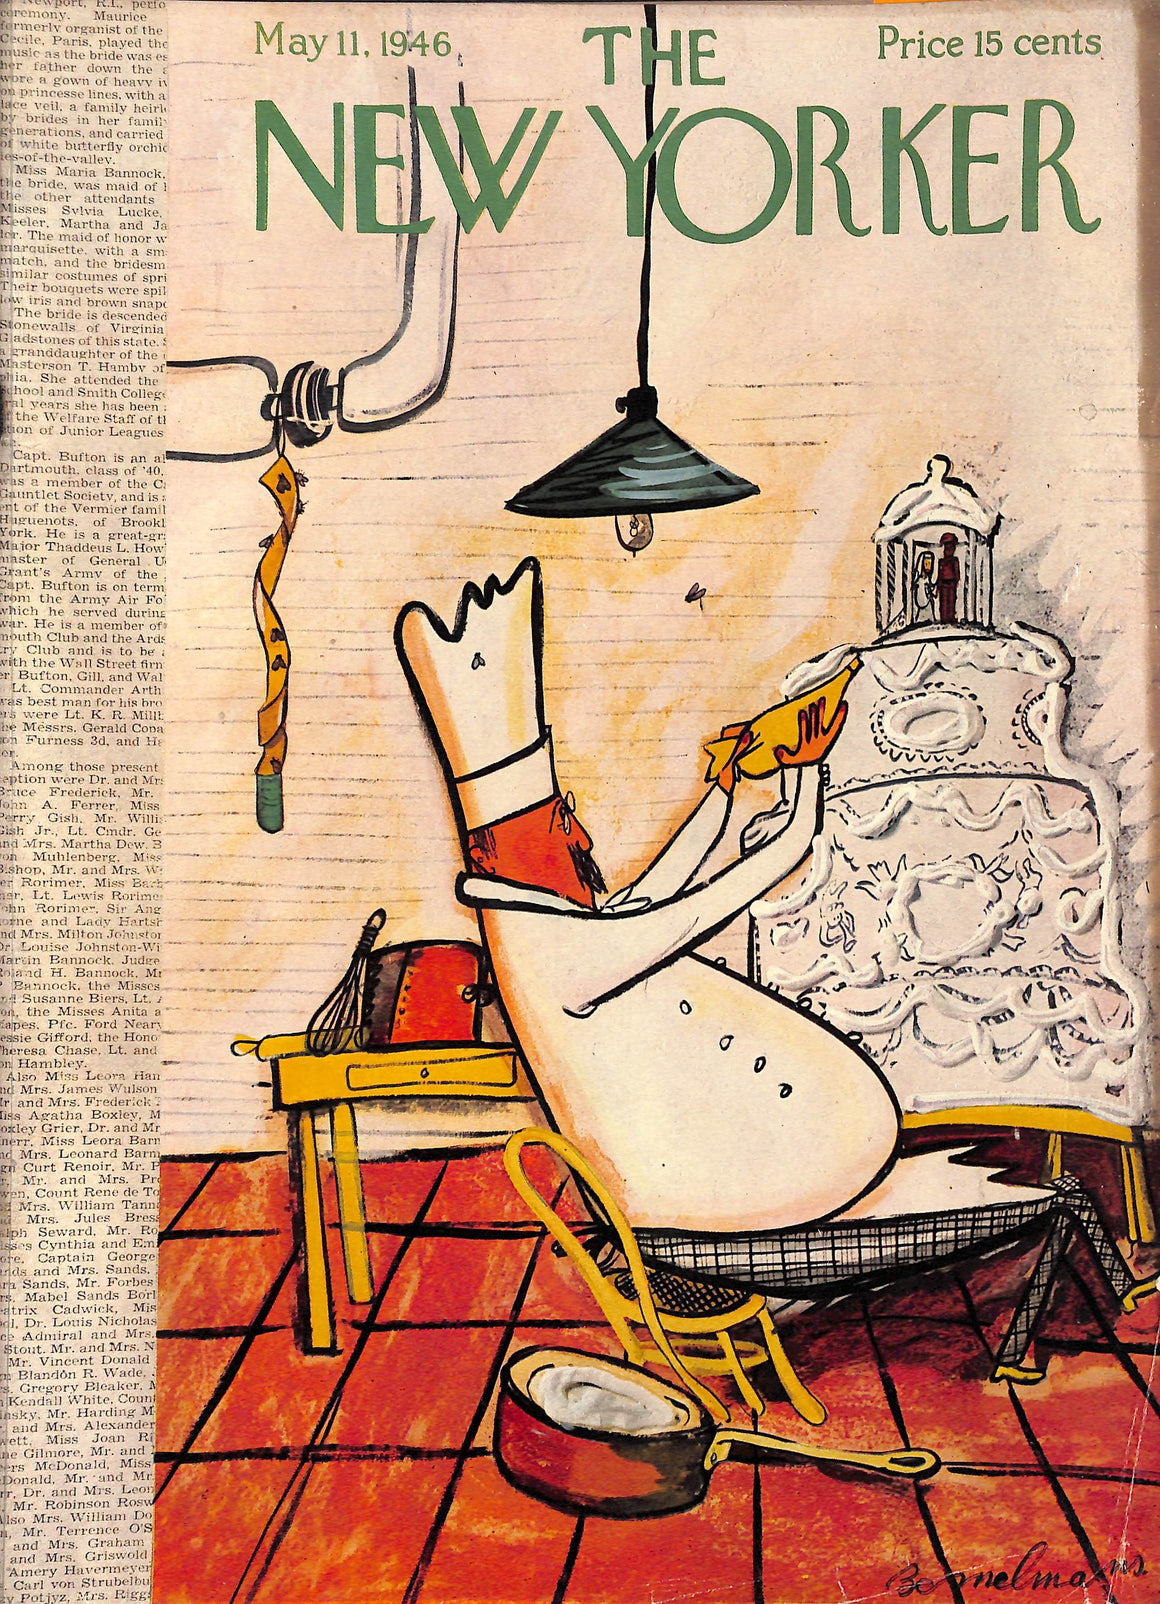 The New Yorker May 11, 1946 (SOLD)